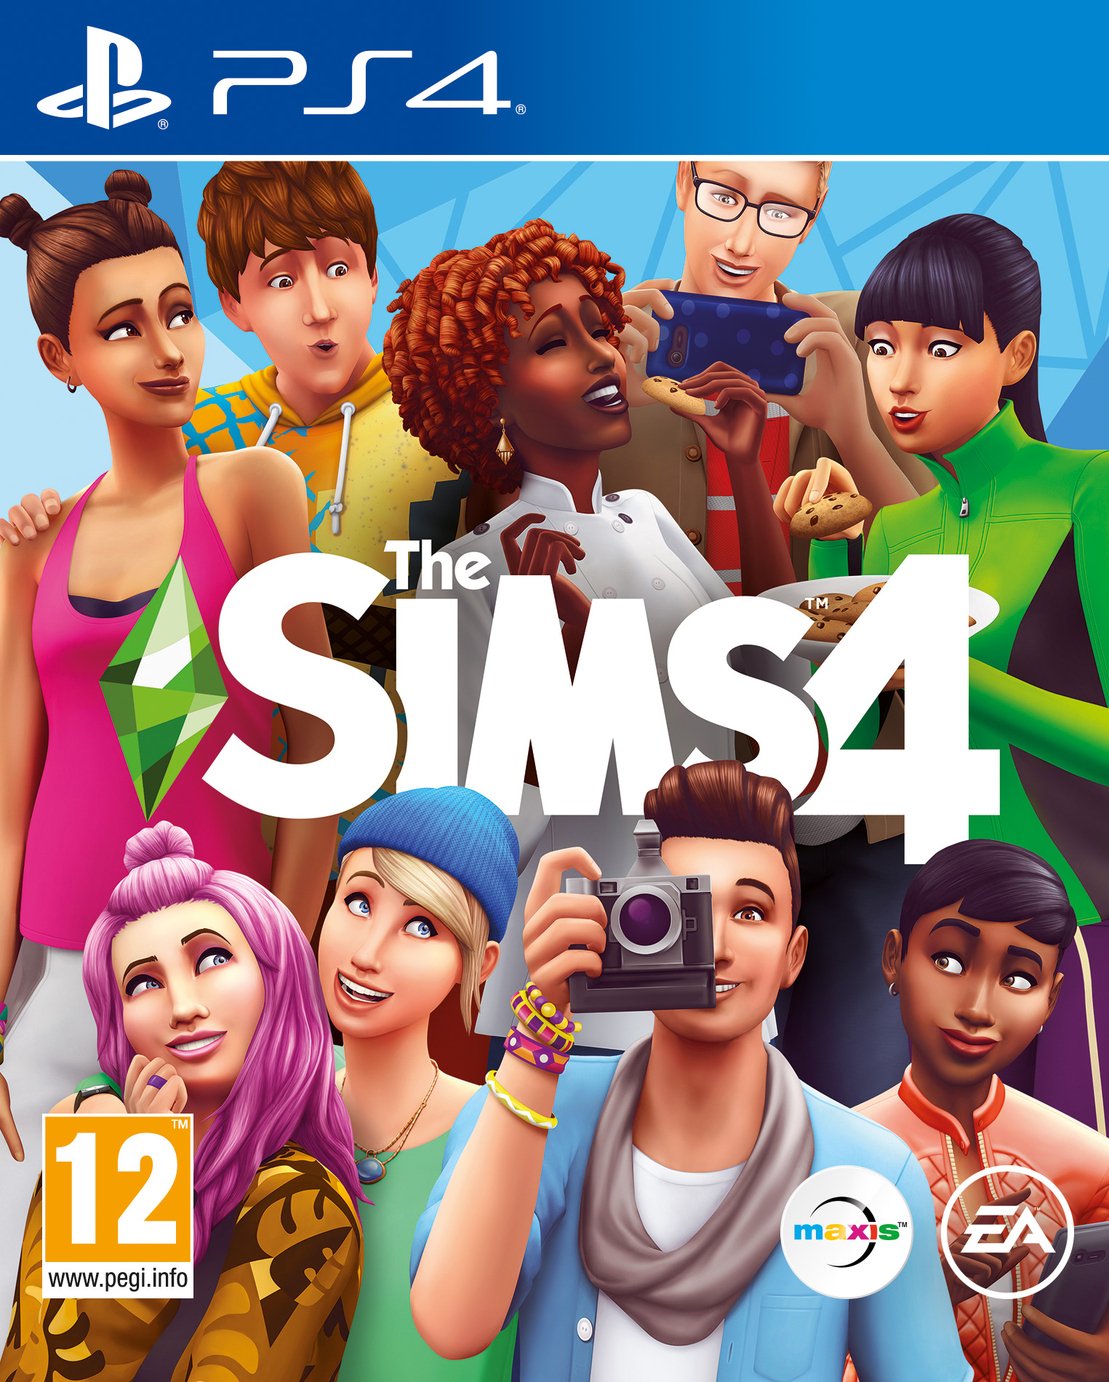 The Sims 4 Ps4 Game Reviews